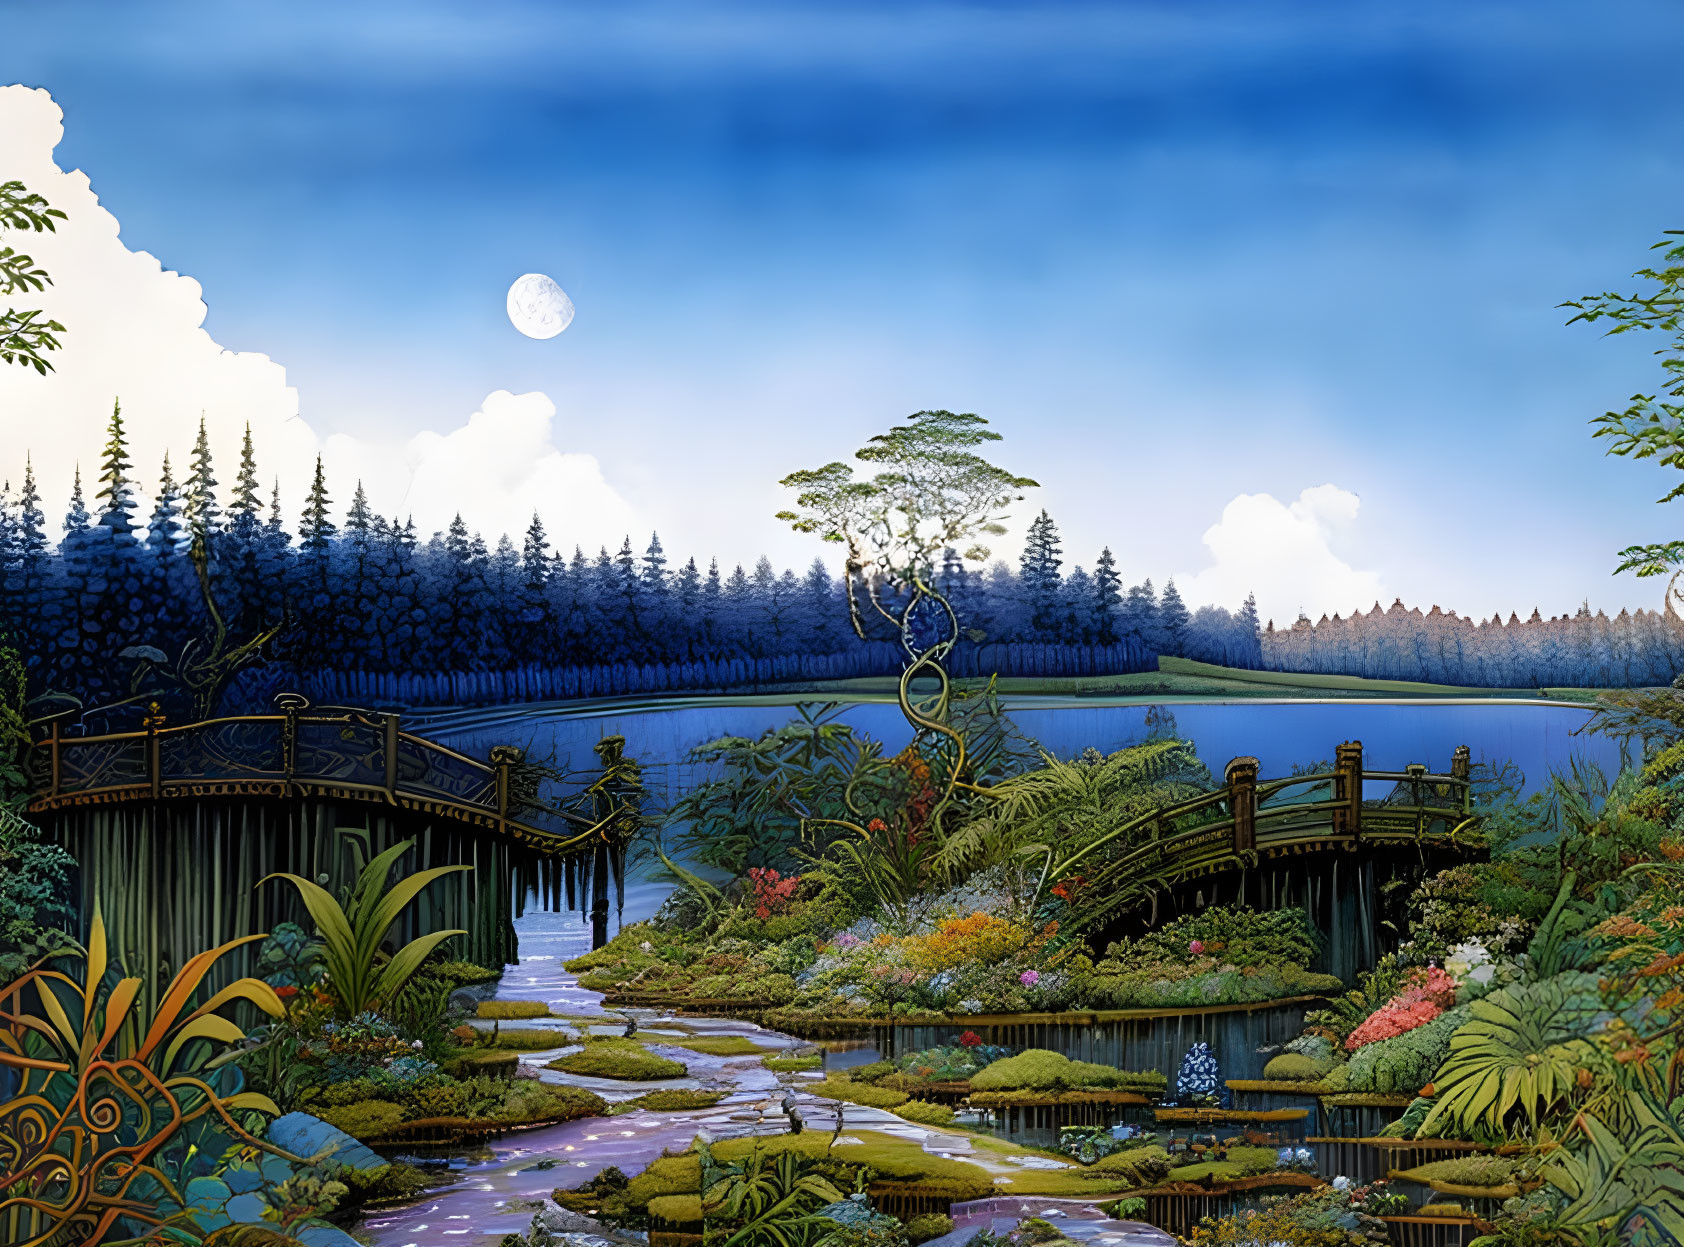 Tranquil Moonlit Night Scene with Wooden Bridges and Lush Greenery